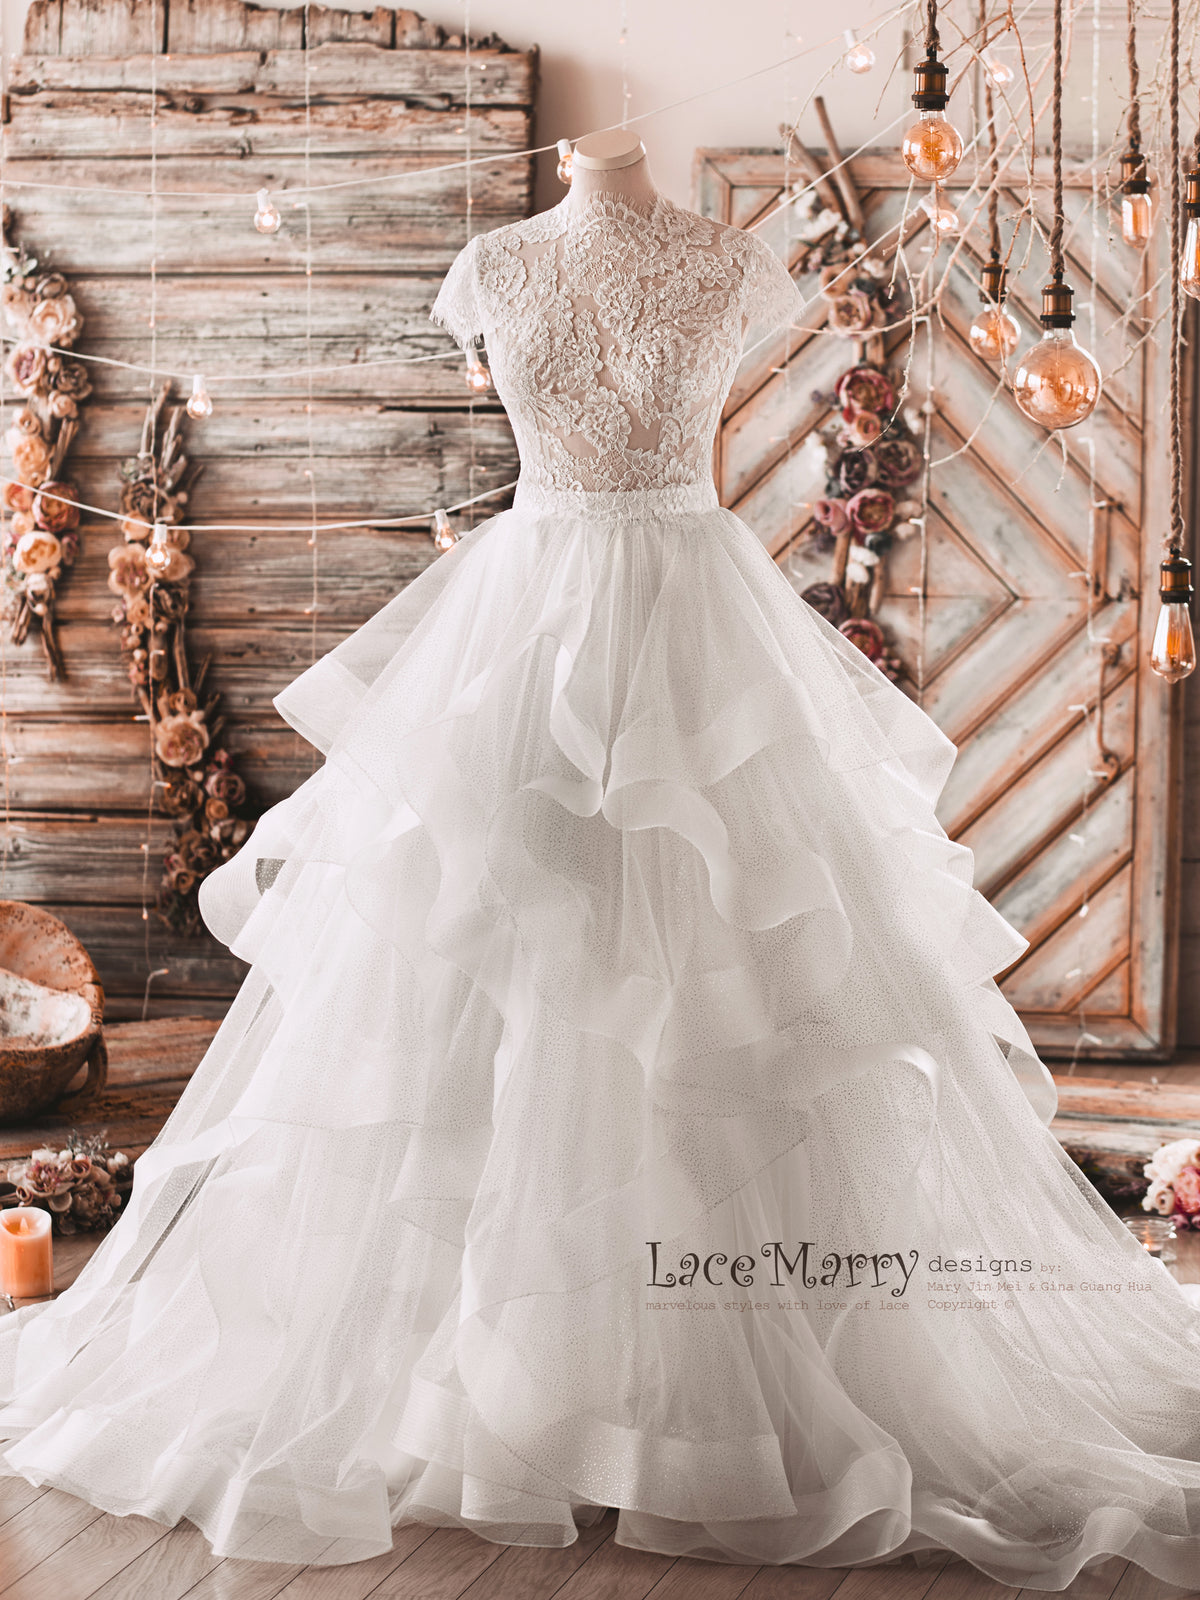 Custom Bridal Lace Top with Cap Sleeves and High Collar - LaceMarry